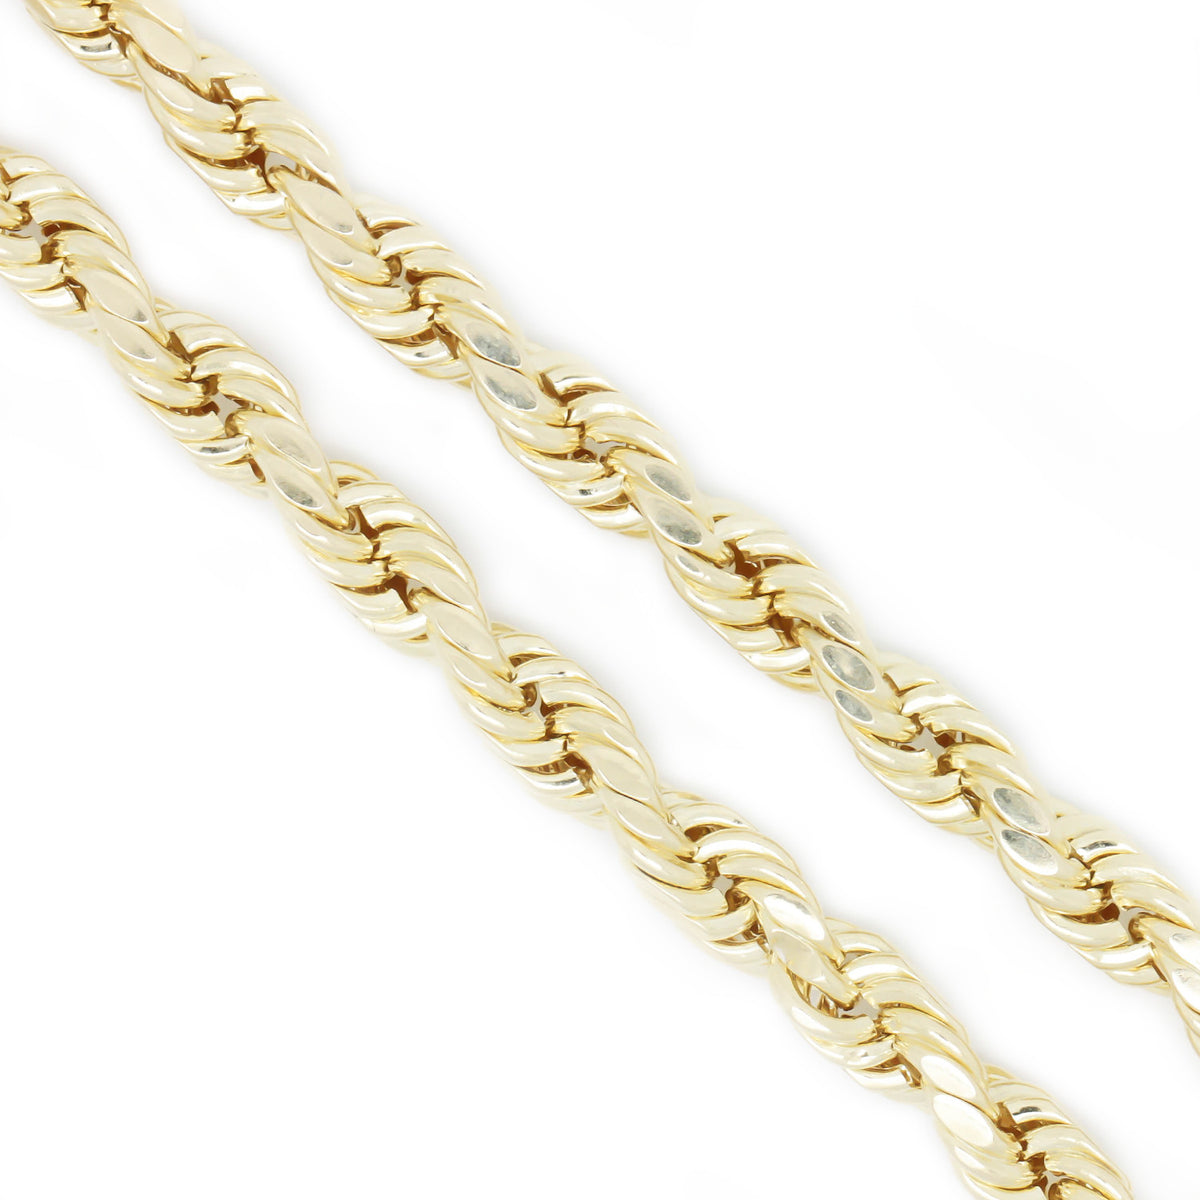 10K Yellow Gold 2.45 mm Rope Chain Necklace 26.5 Inches